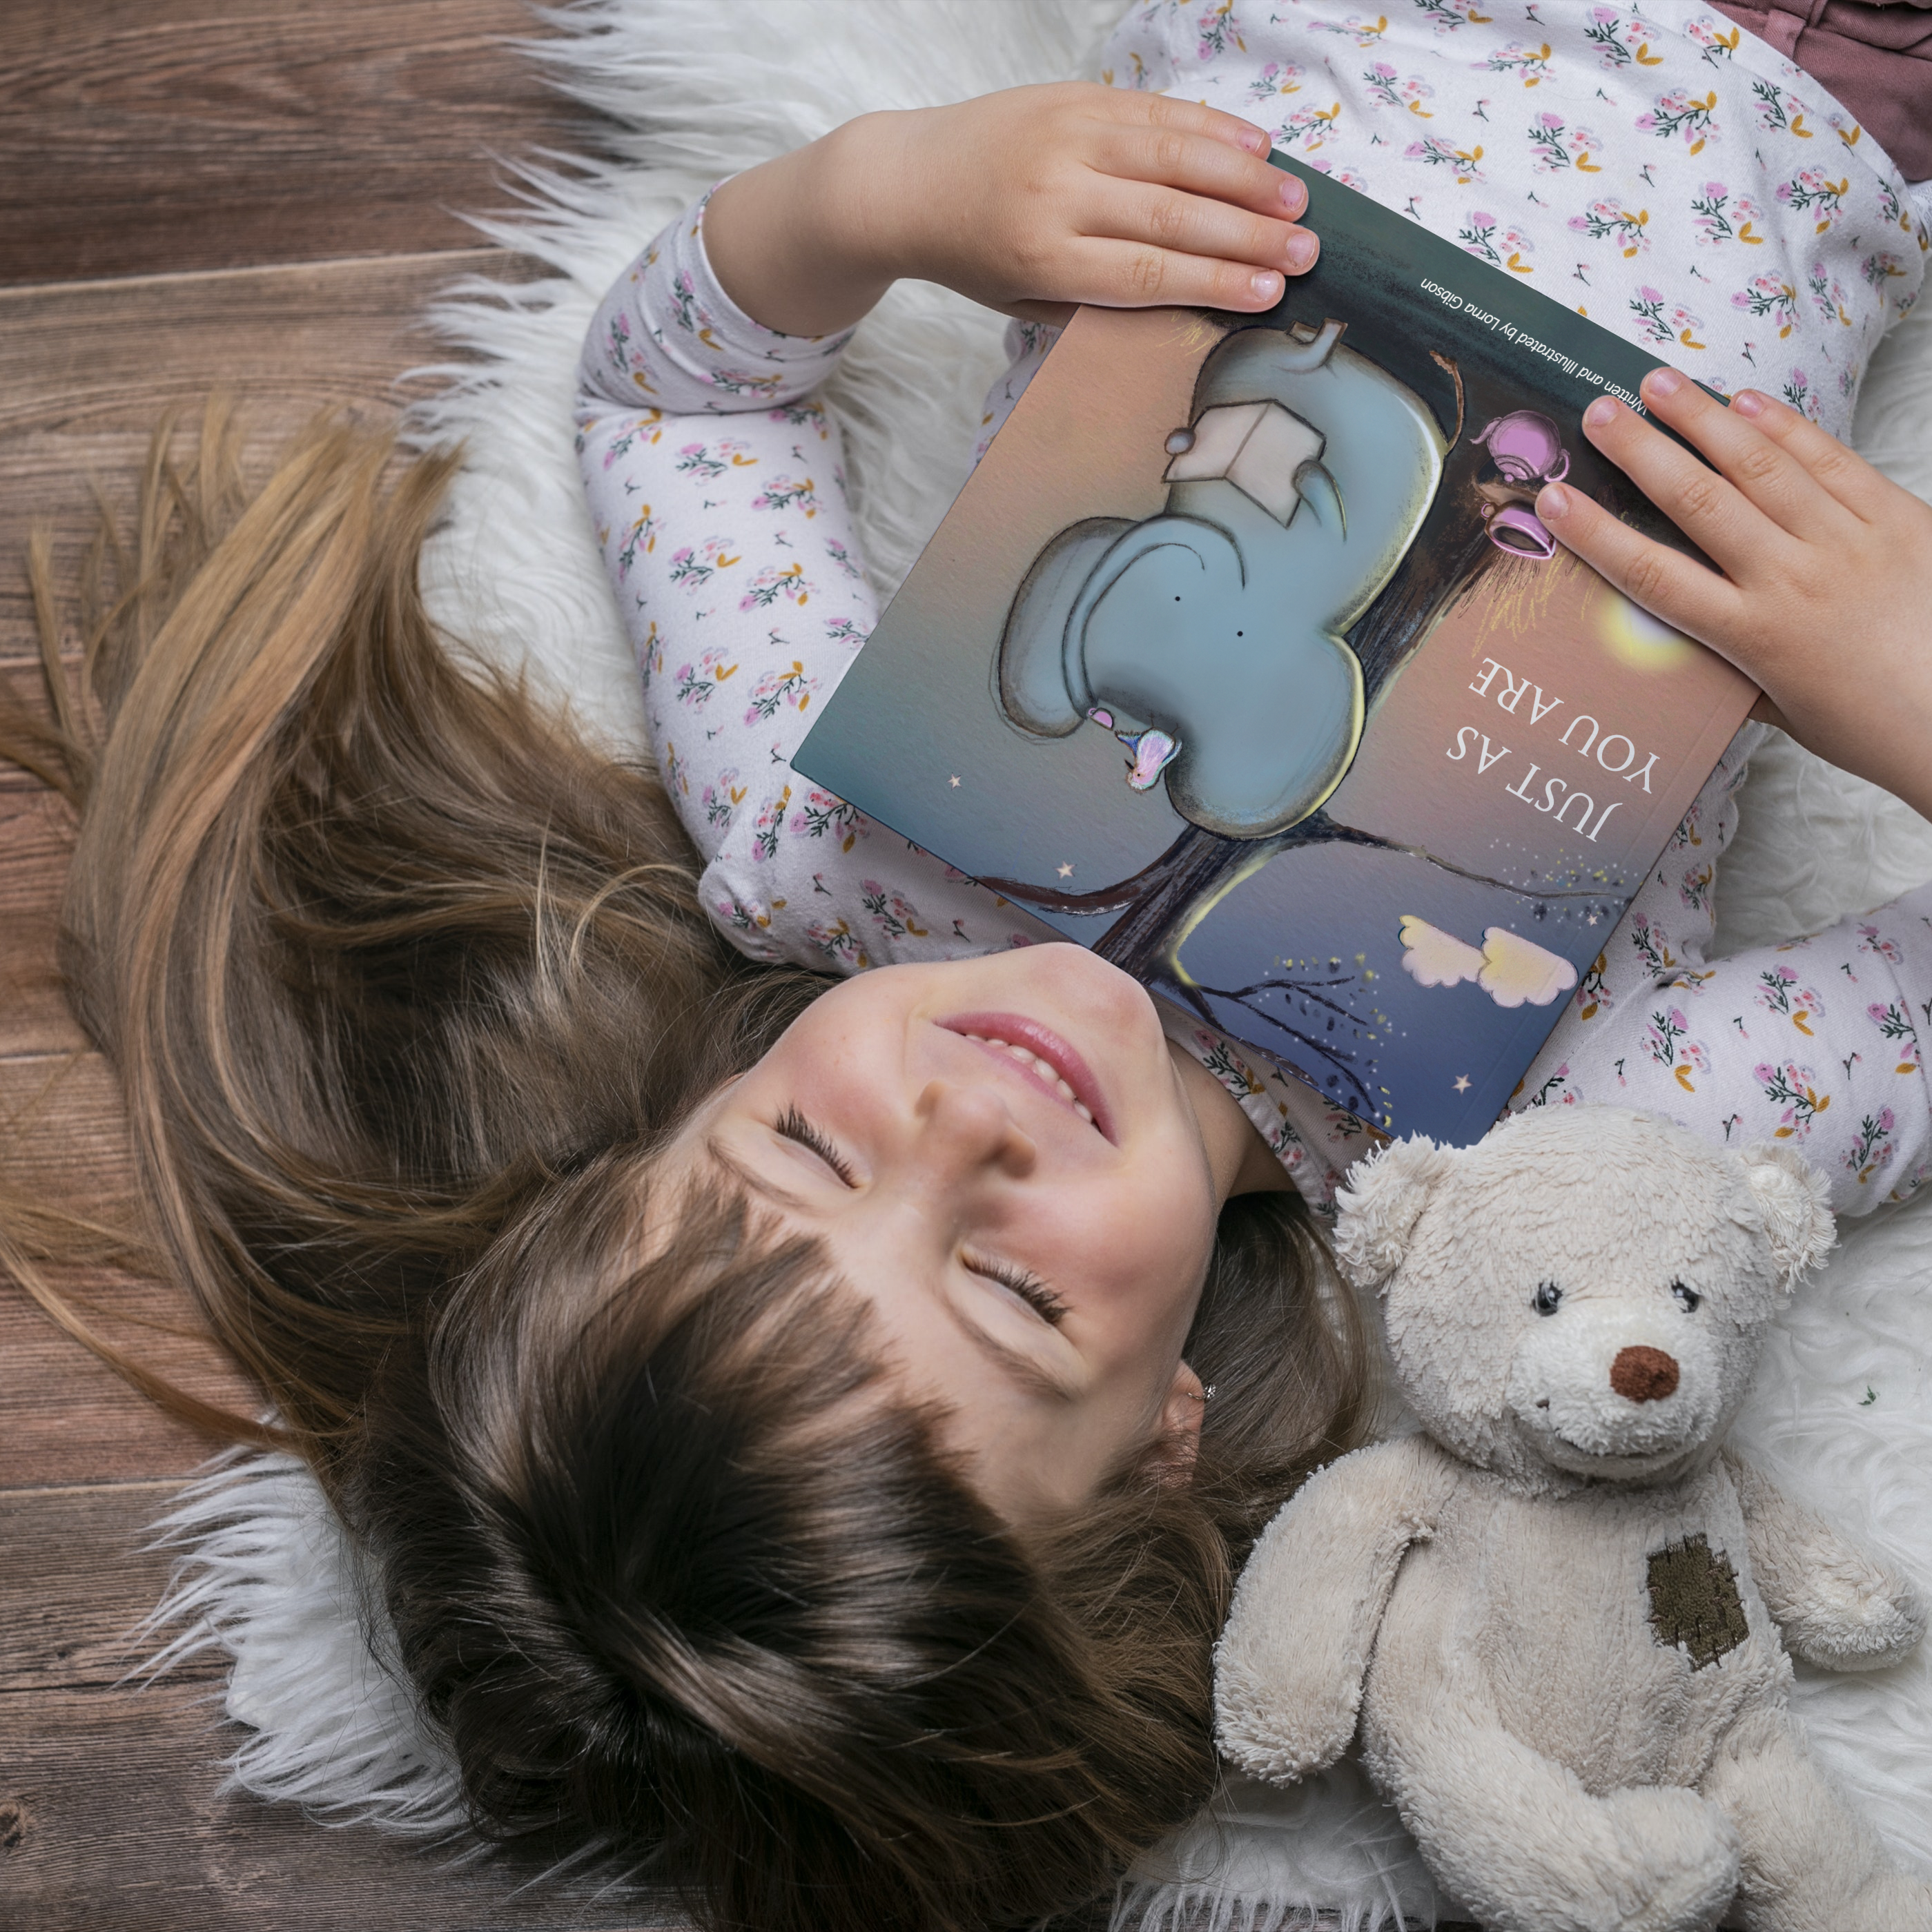 Gift ideas for kids - Image shows a little girl holding a copy of Just As You Are beside her teddy bear lying on a cosy fluffy rug